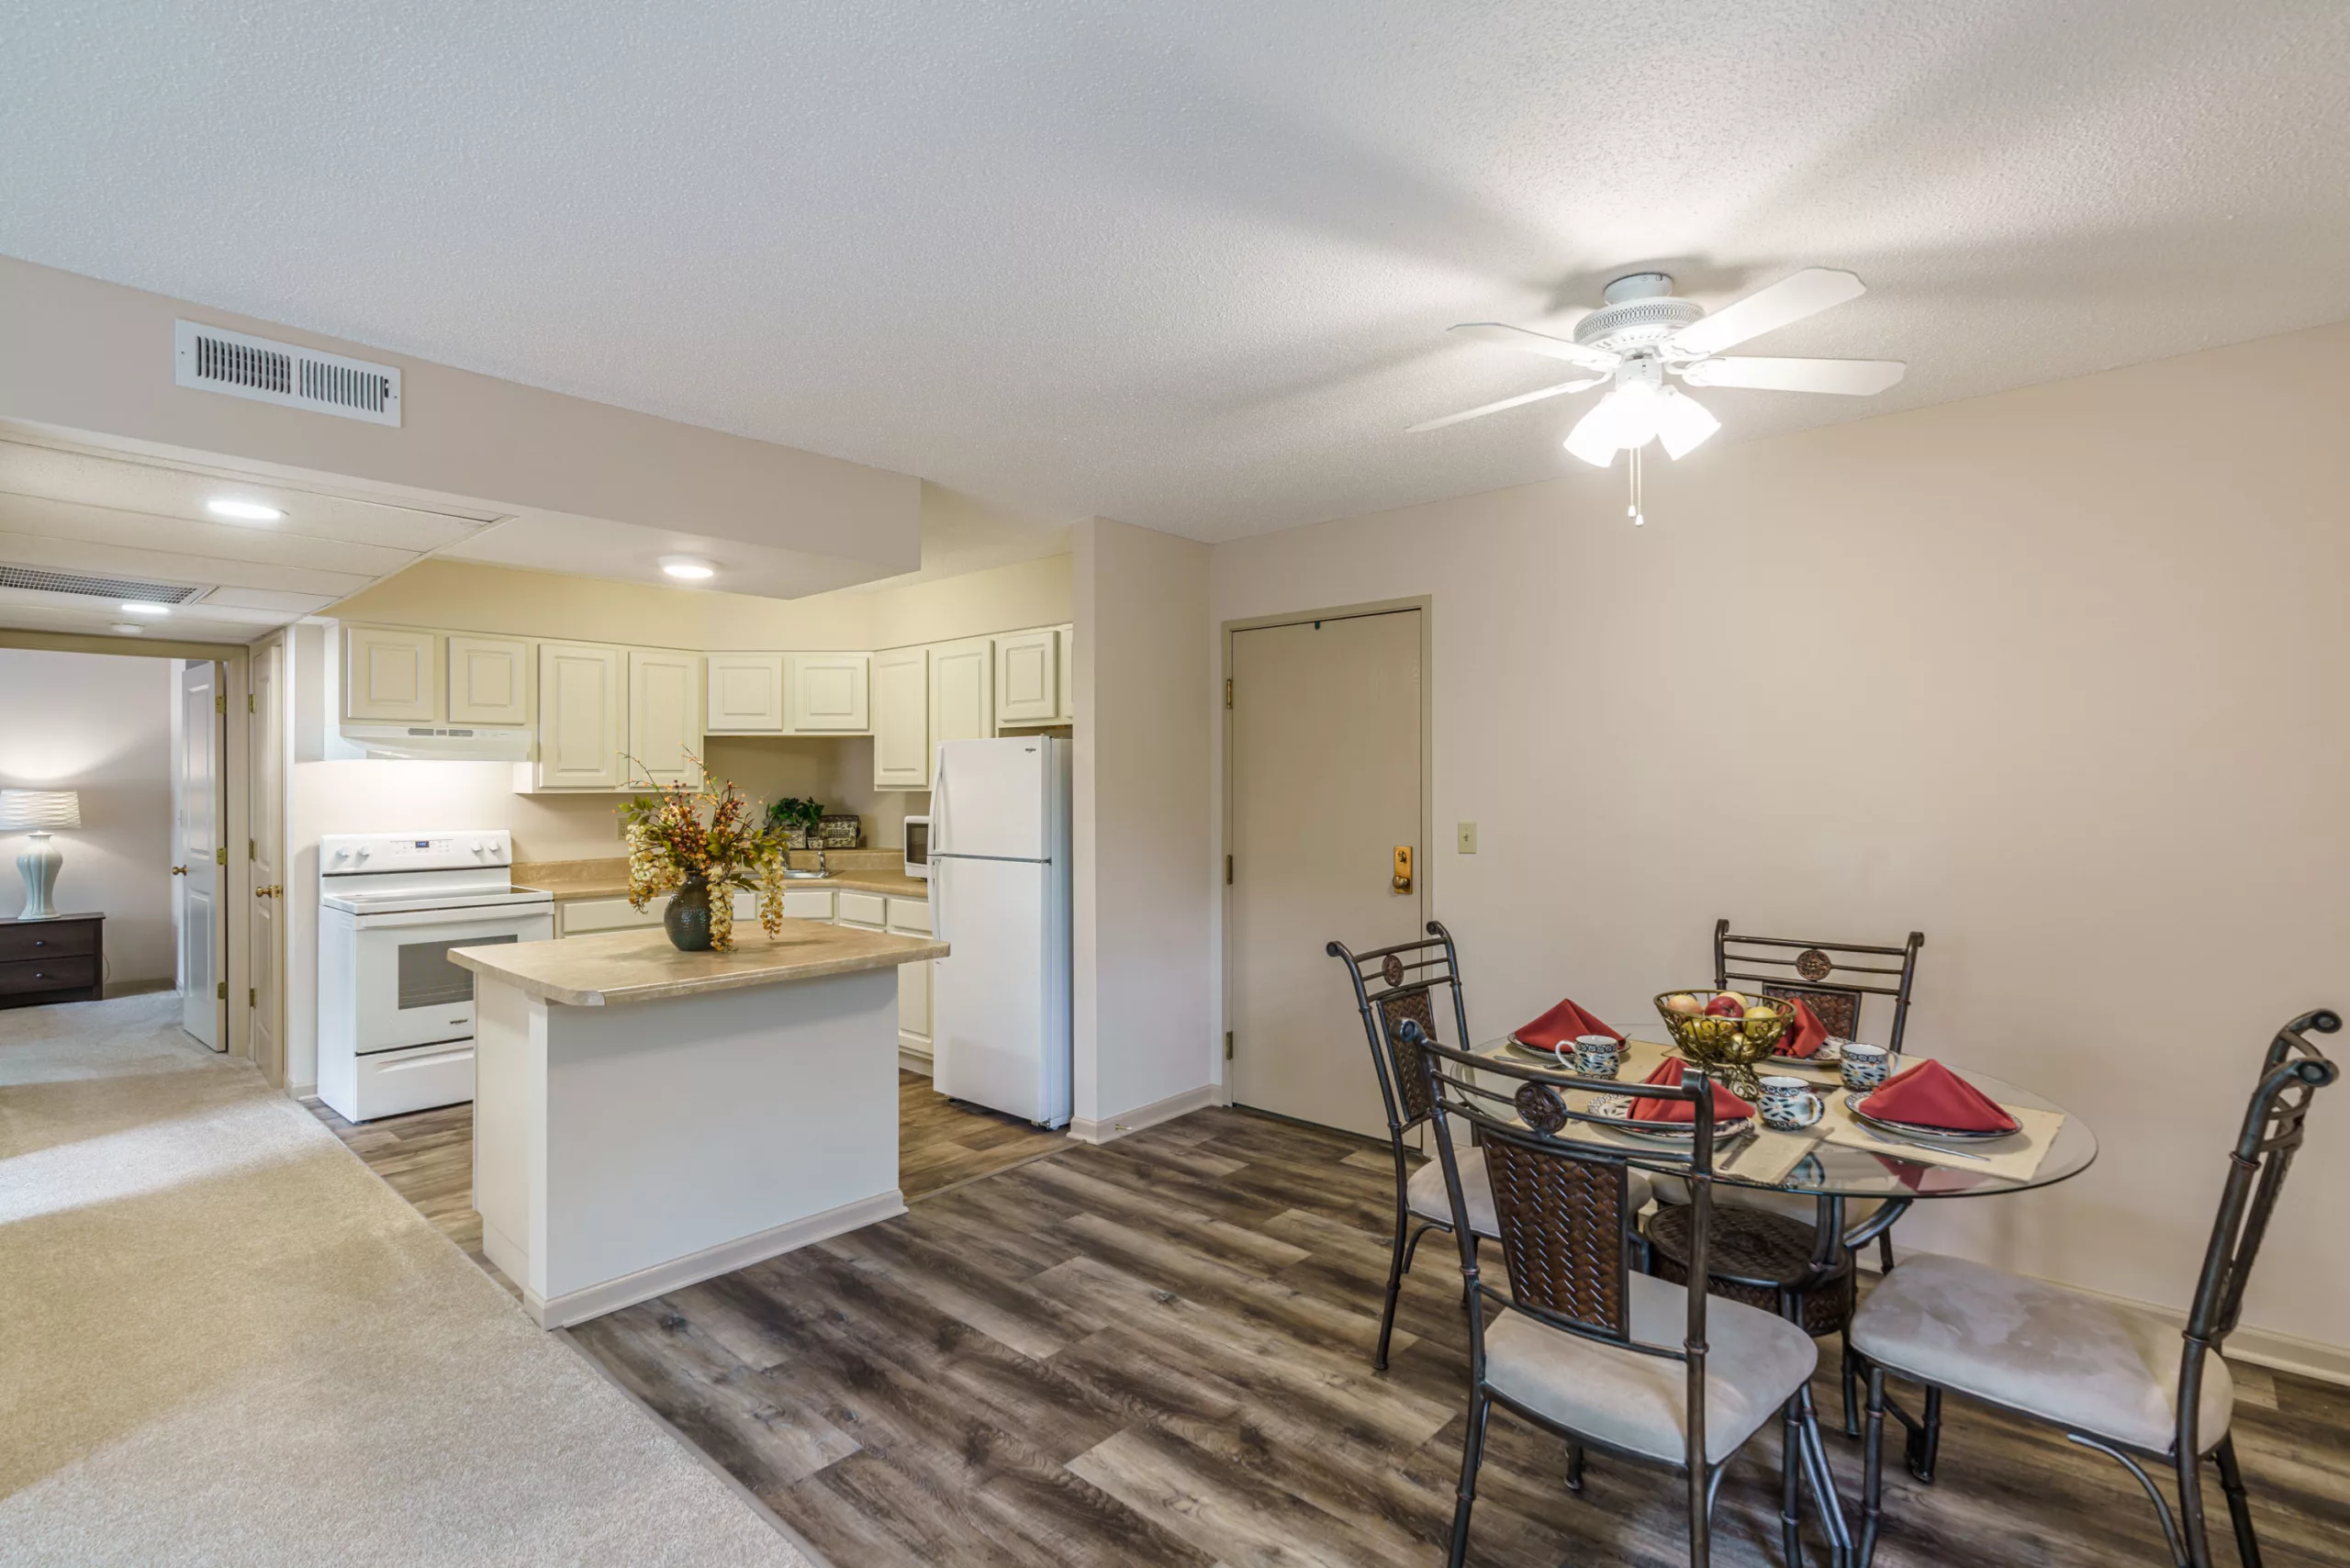 A spacious kitchen and dining area of one of the affordable apartments at the Terrace.